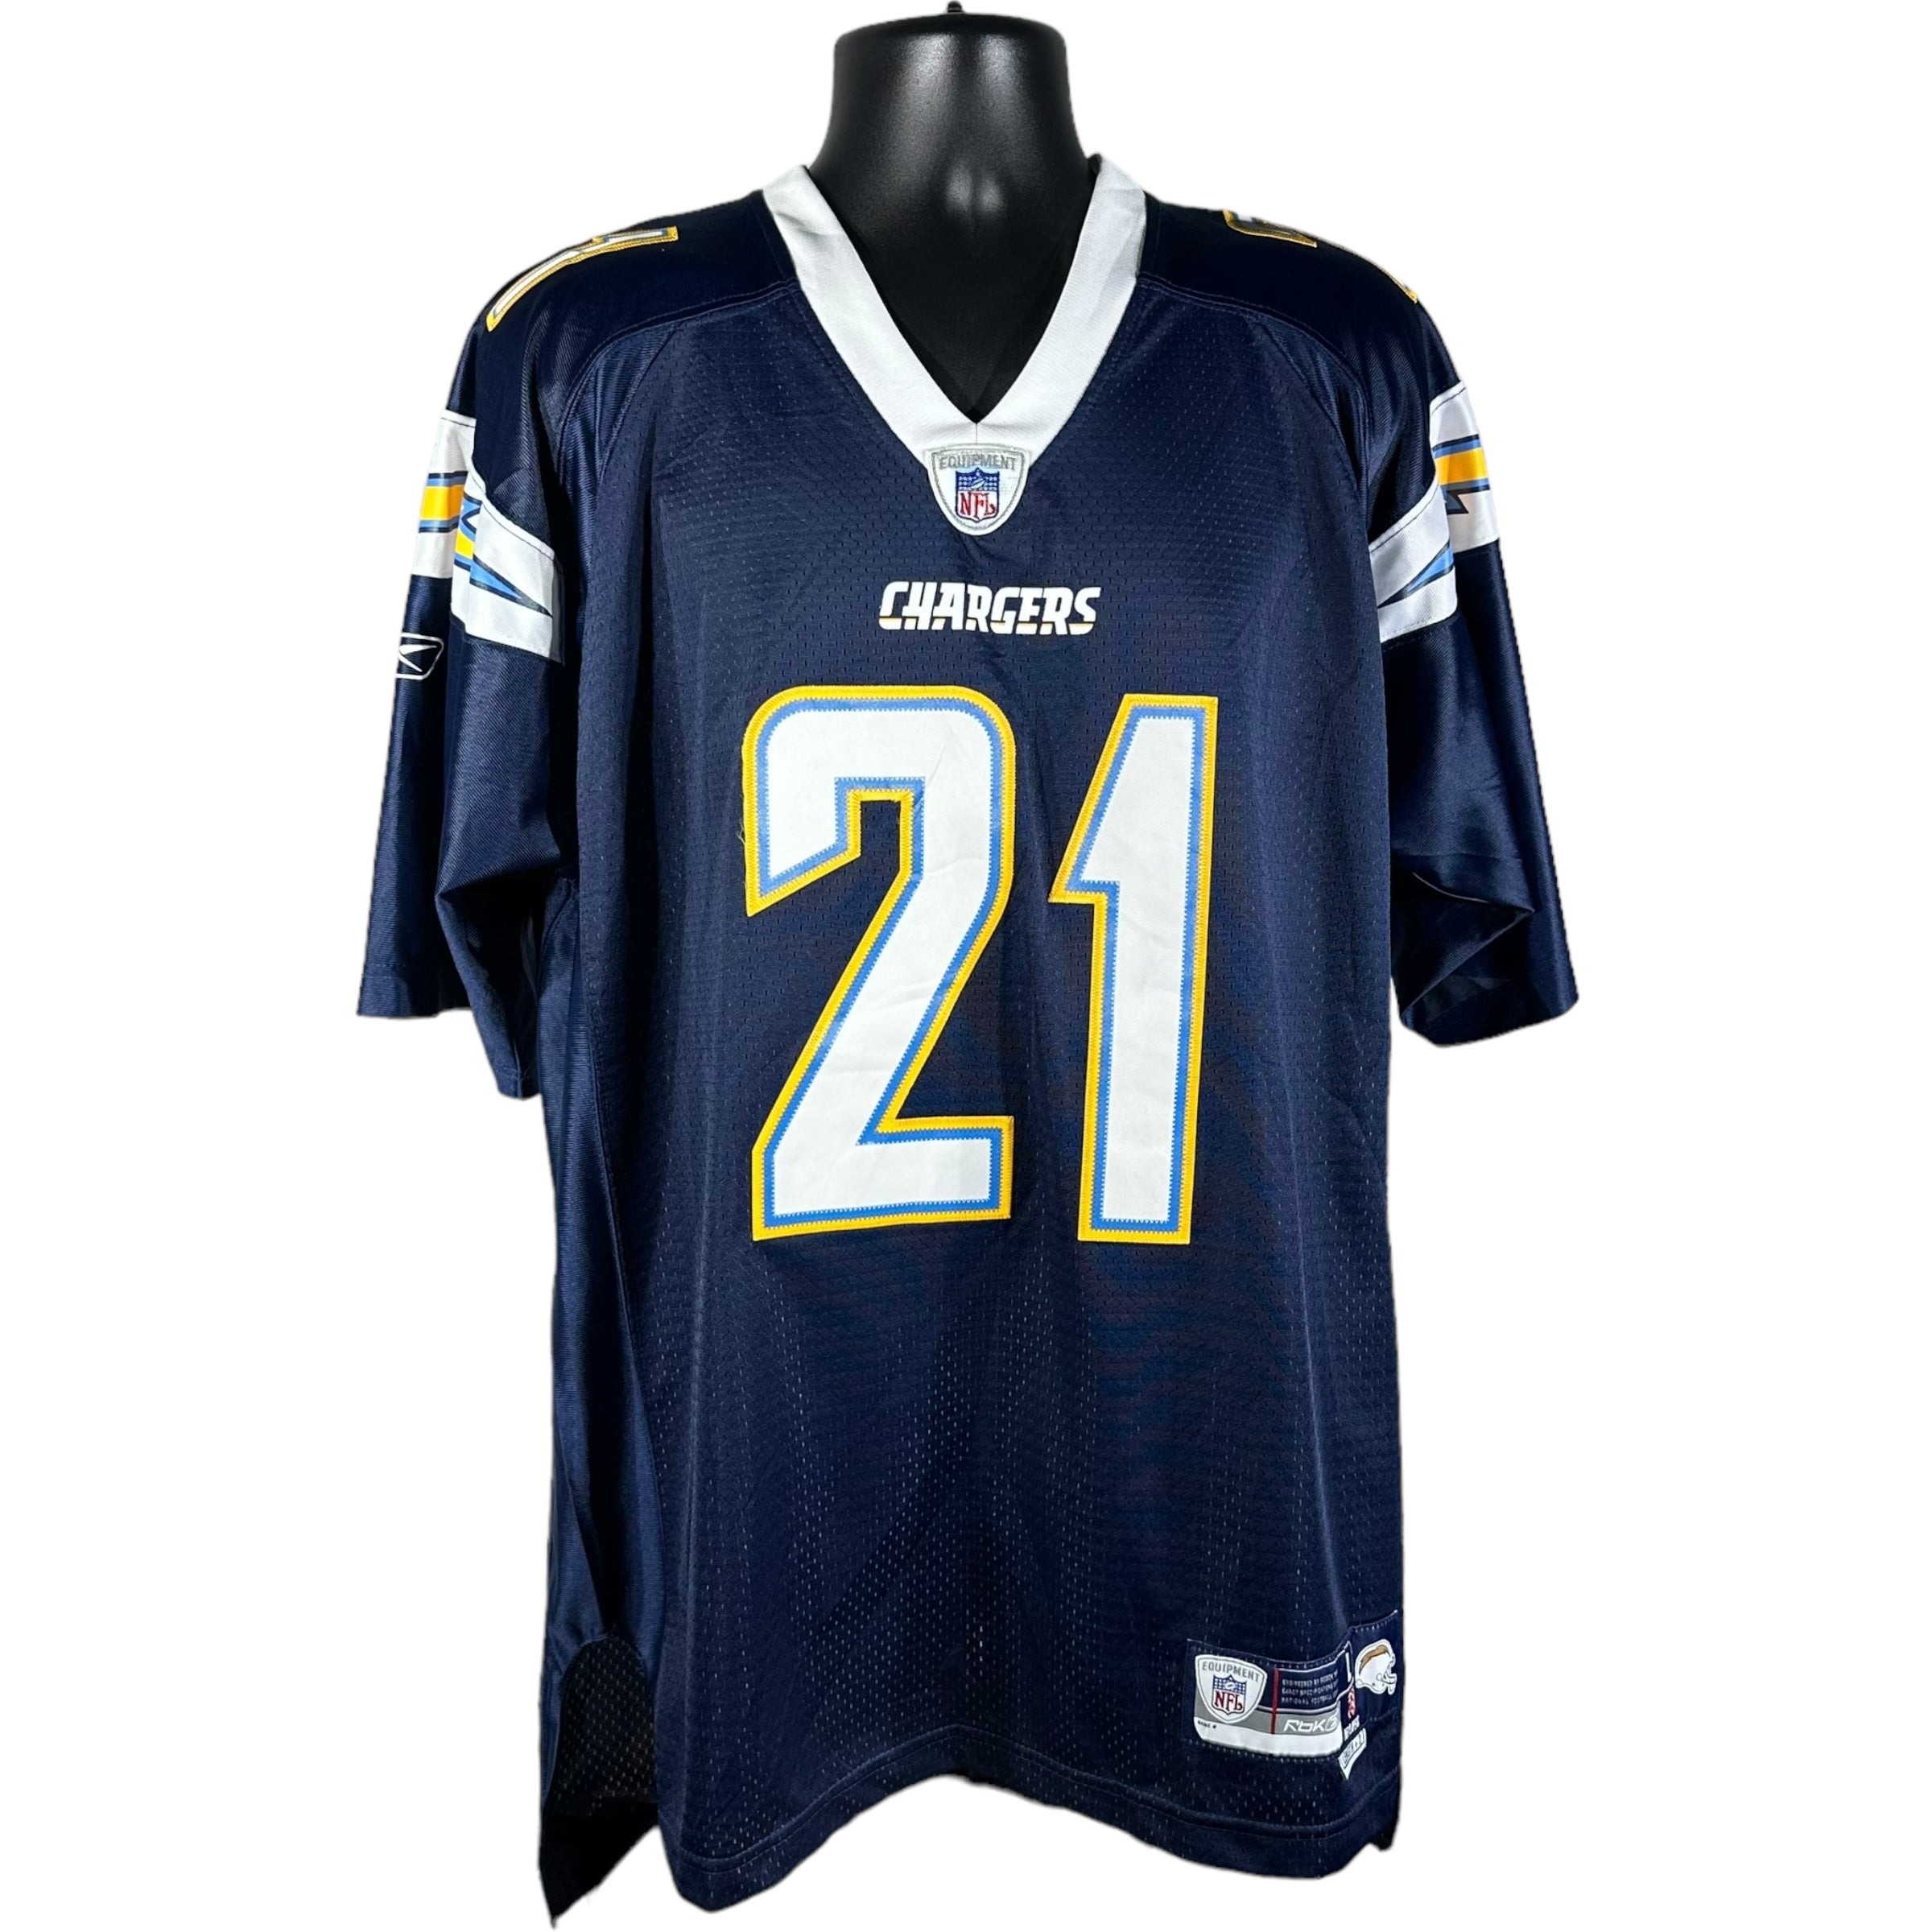 Vintage San Diego Chargers #21 LaDainian Tomlinson Jersey